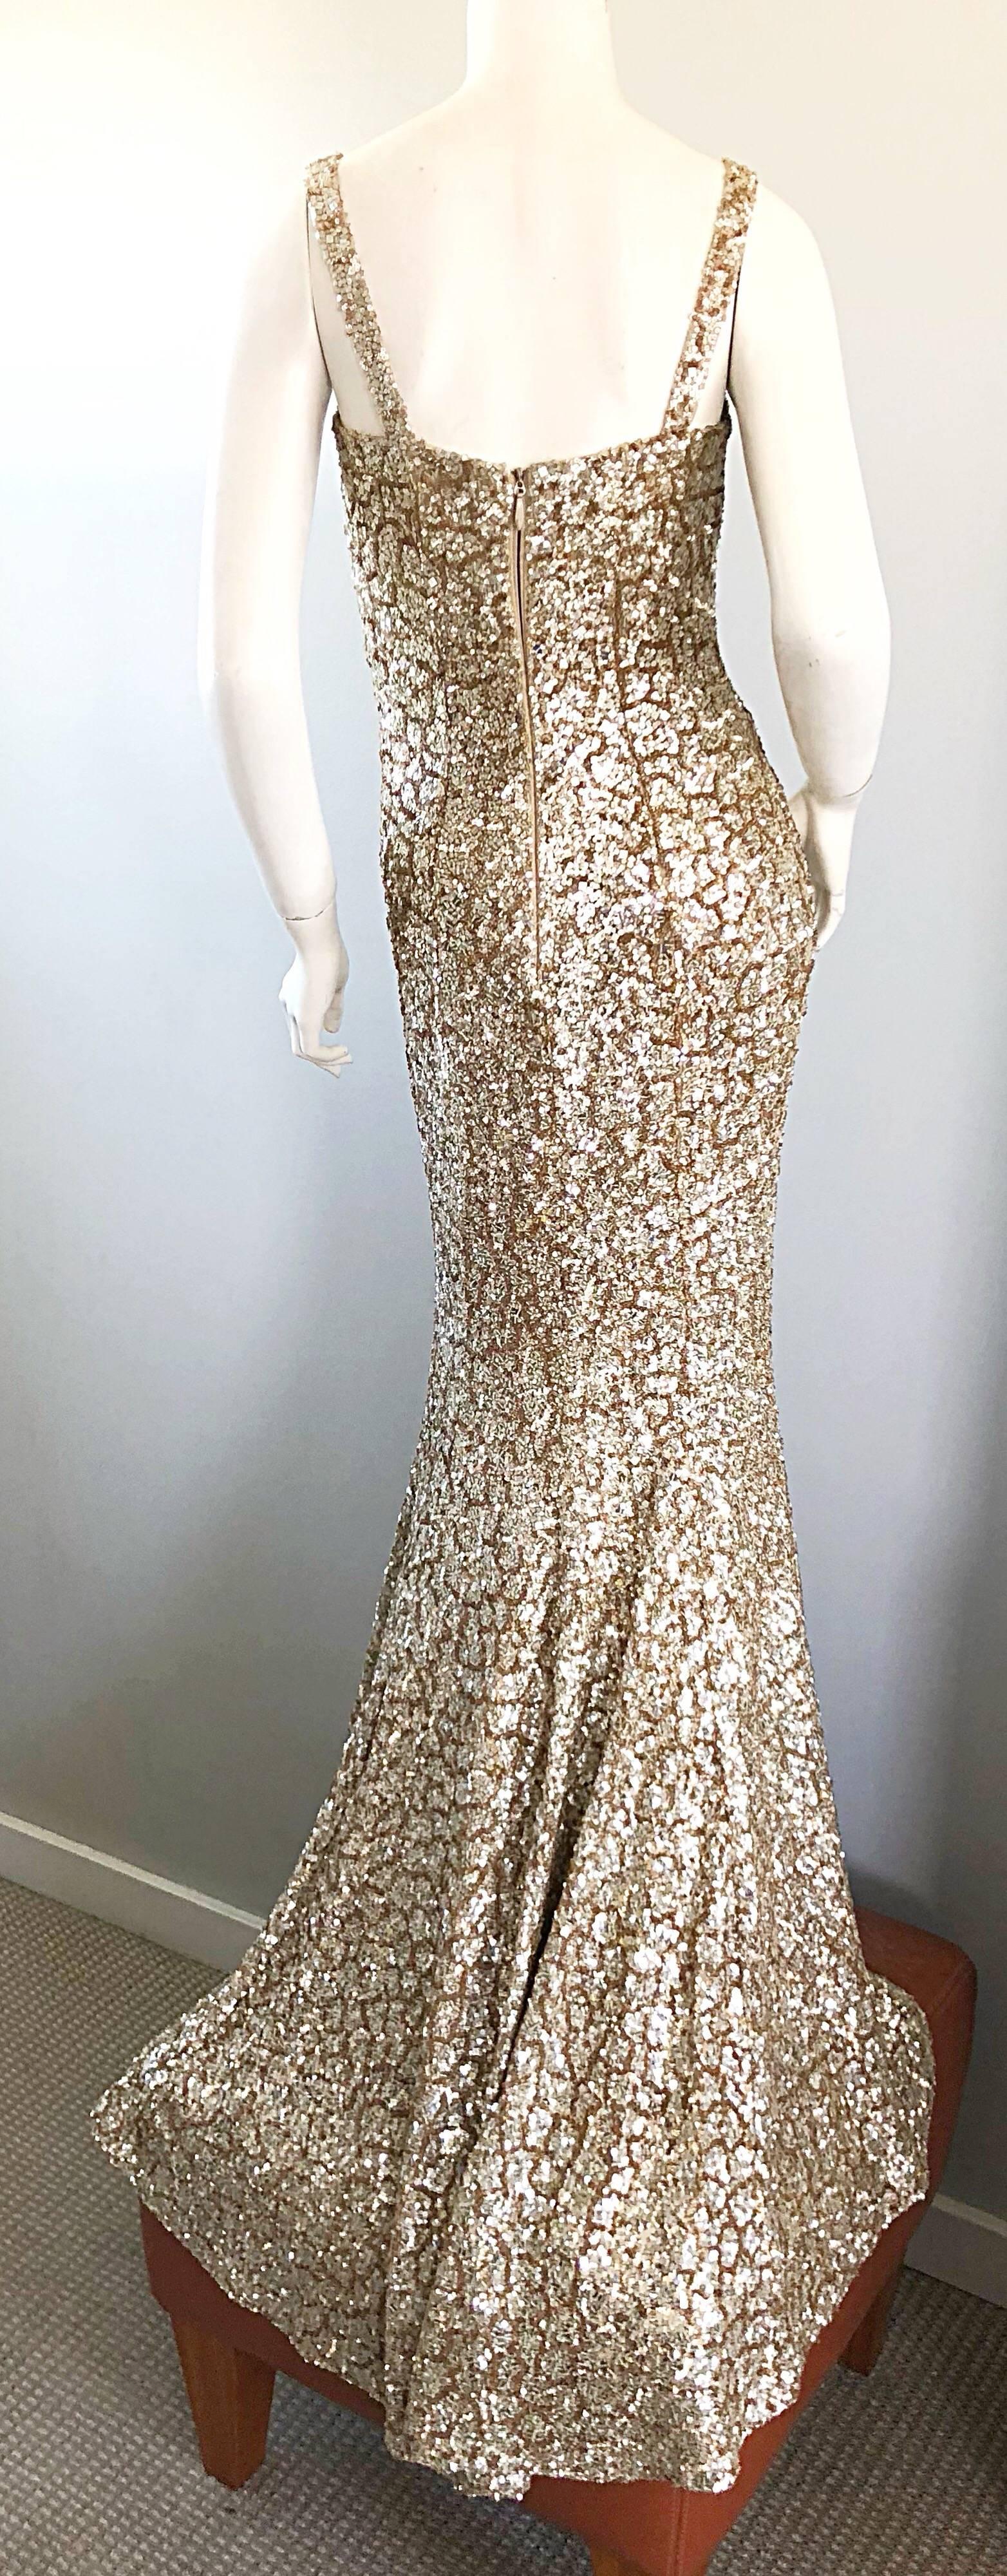 Gorgeous Resort 2012 MONIQUE LHUILLIER gold and rose gold fully sequined / beaded dramatic trained full length mermaid evening dress! This is one of the most beautiful gowns that I have ever seen! Features tens of thousands of gold nad rose gold